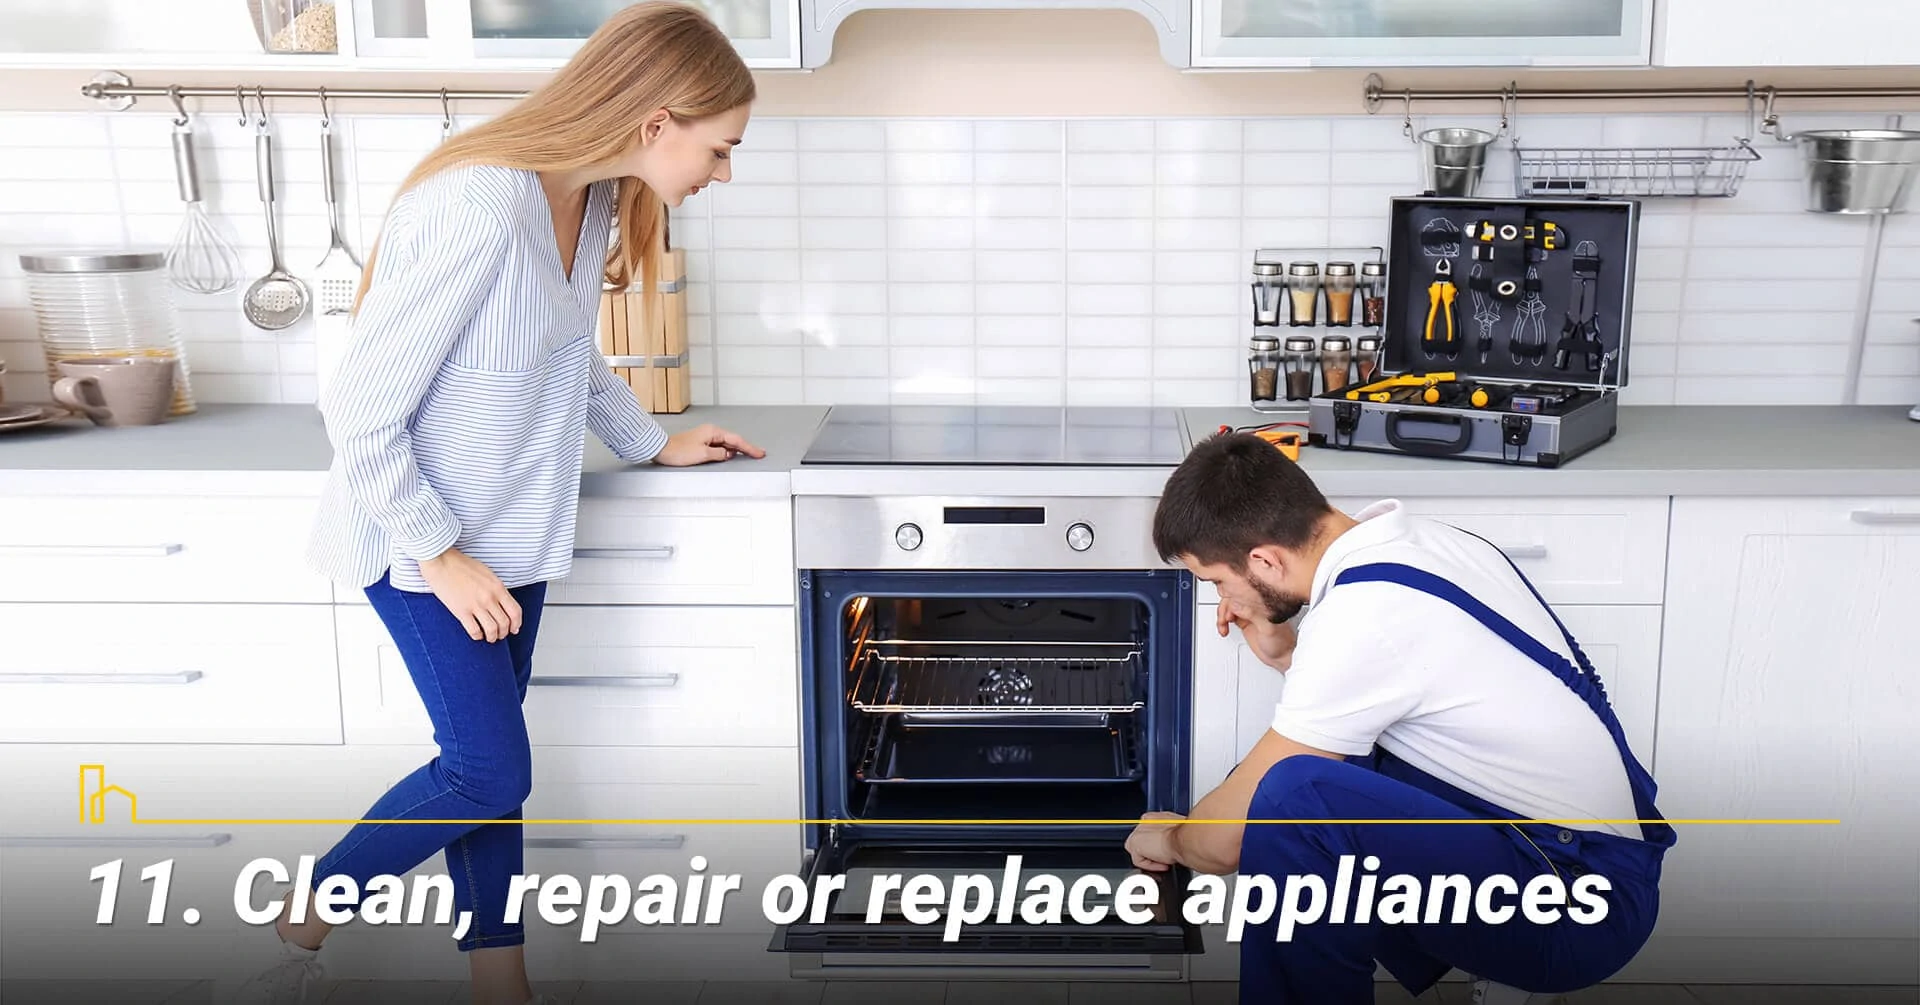 Clean, repair or replace appliances, keep appliances working properly